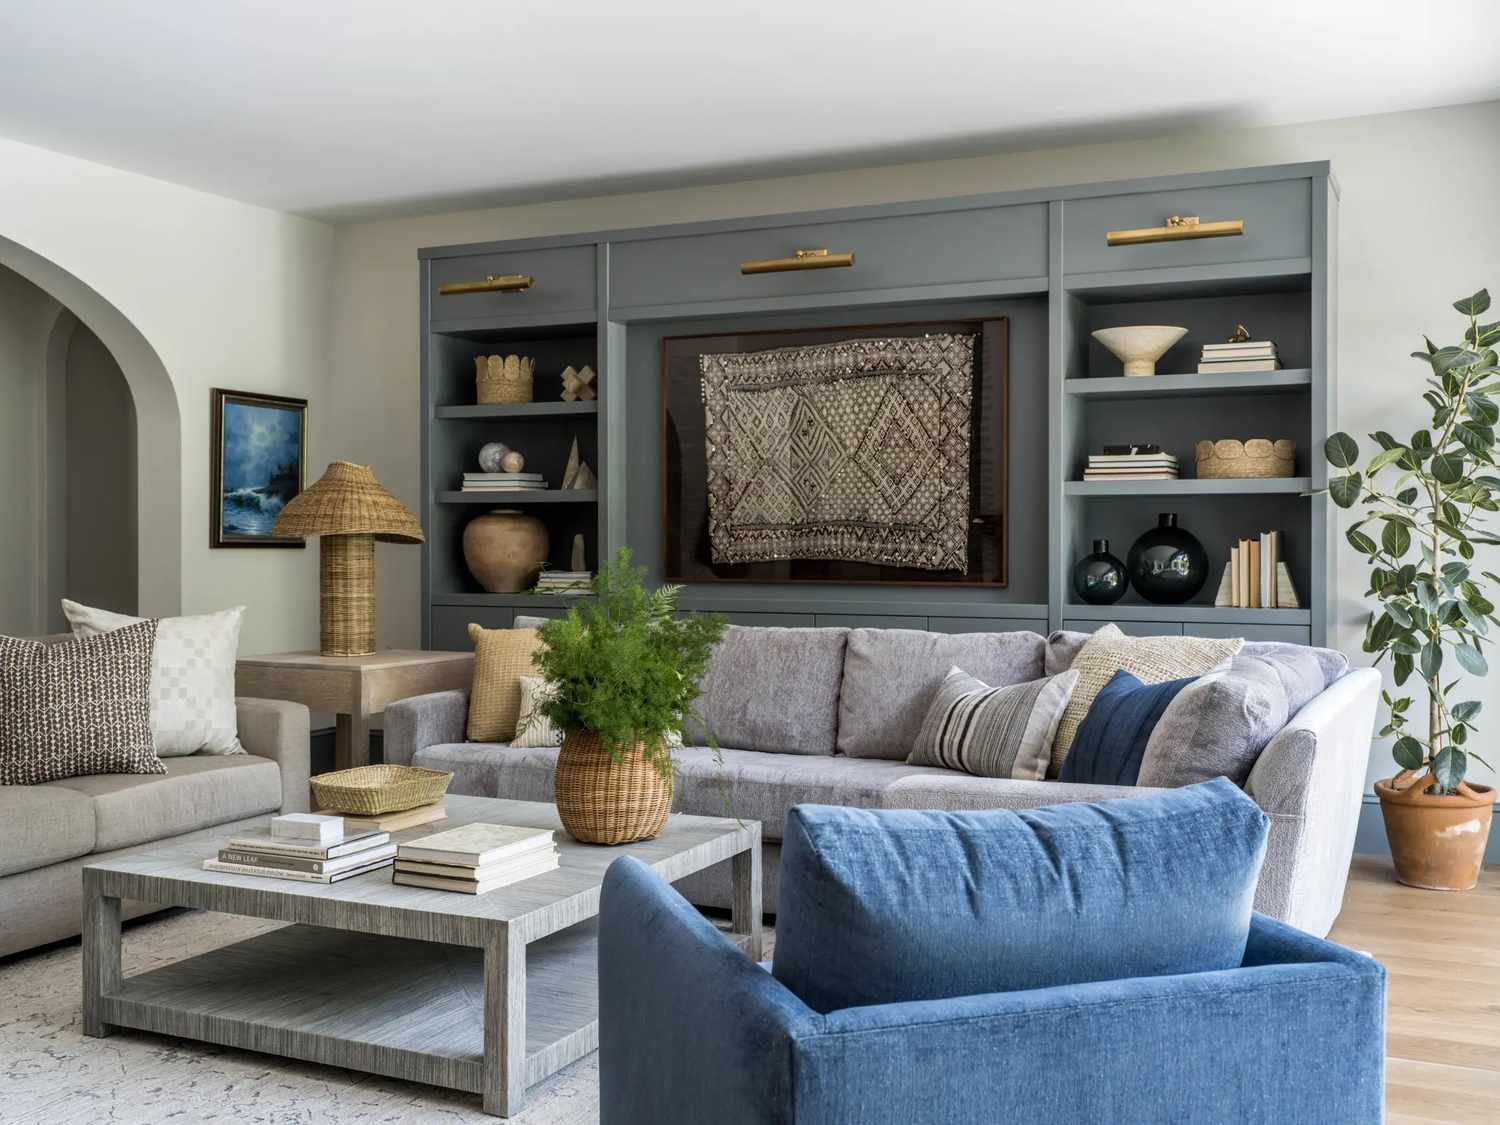 Elegant living room with blue and gray decor.